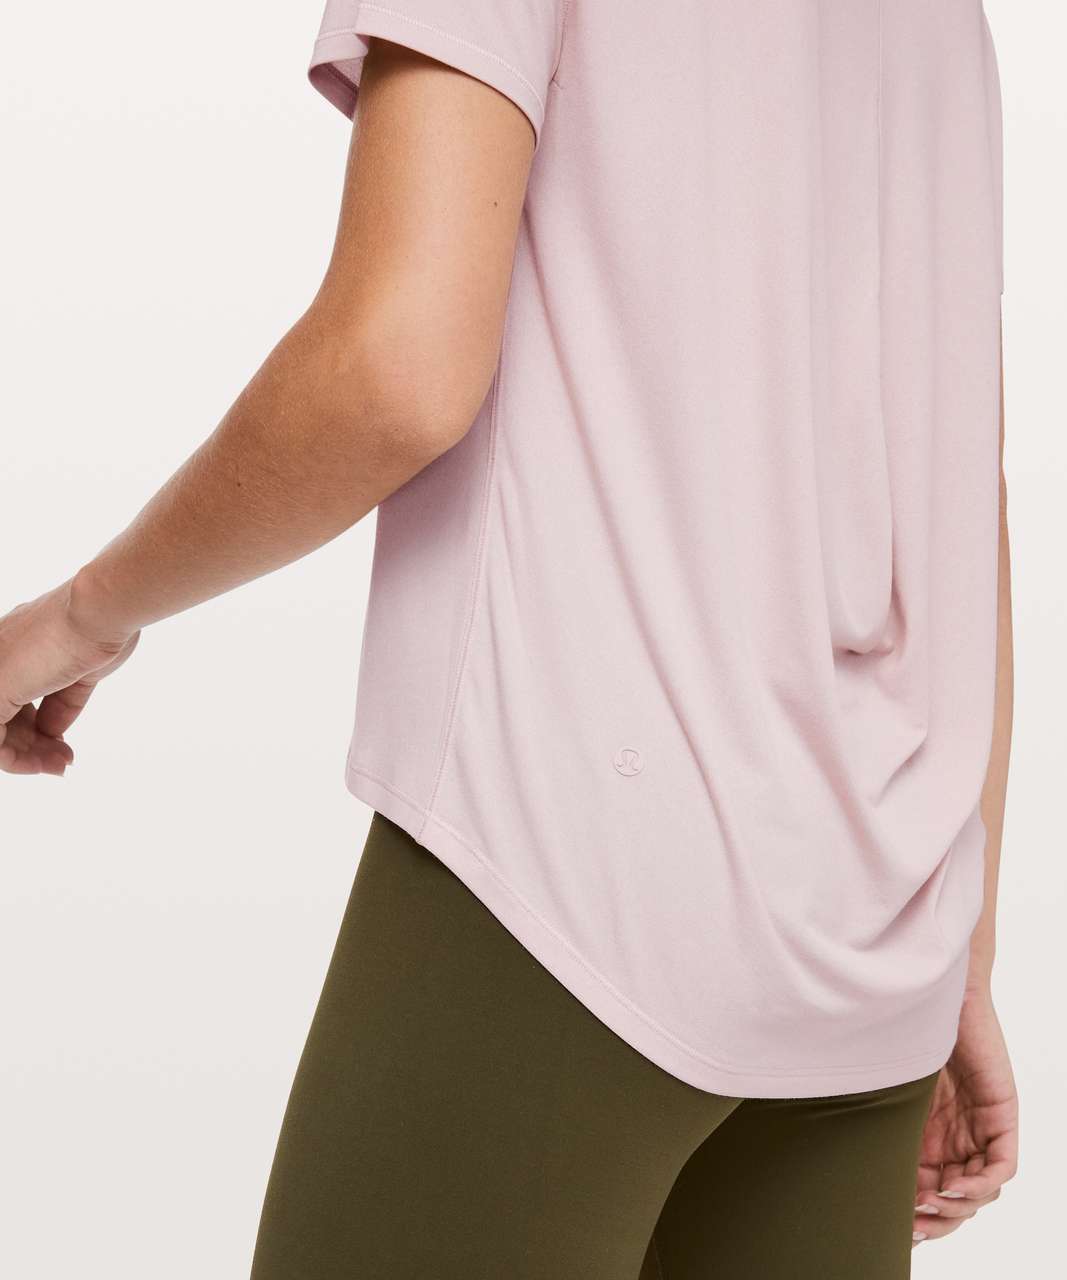 Lululemon Fall In Place Short Sleeve - Heathered Pink Bliss / White